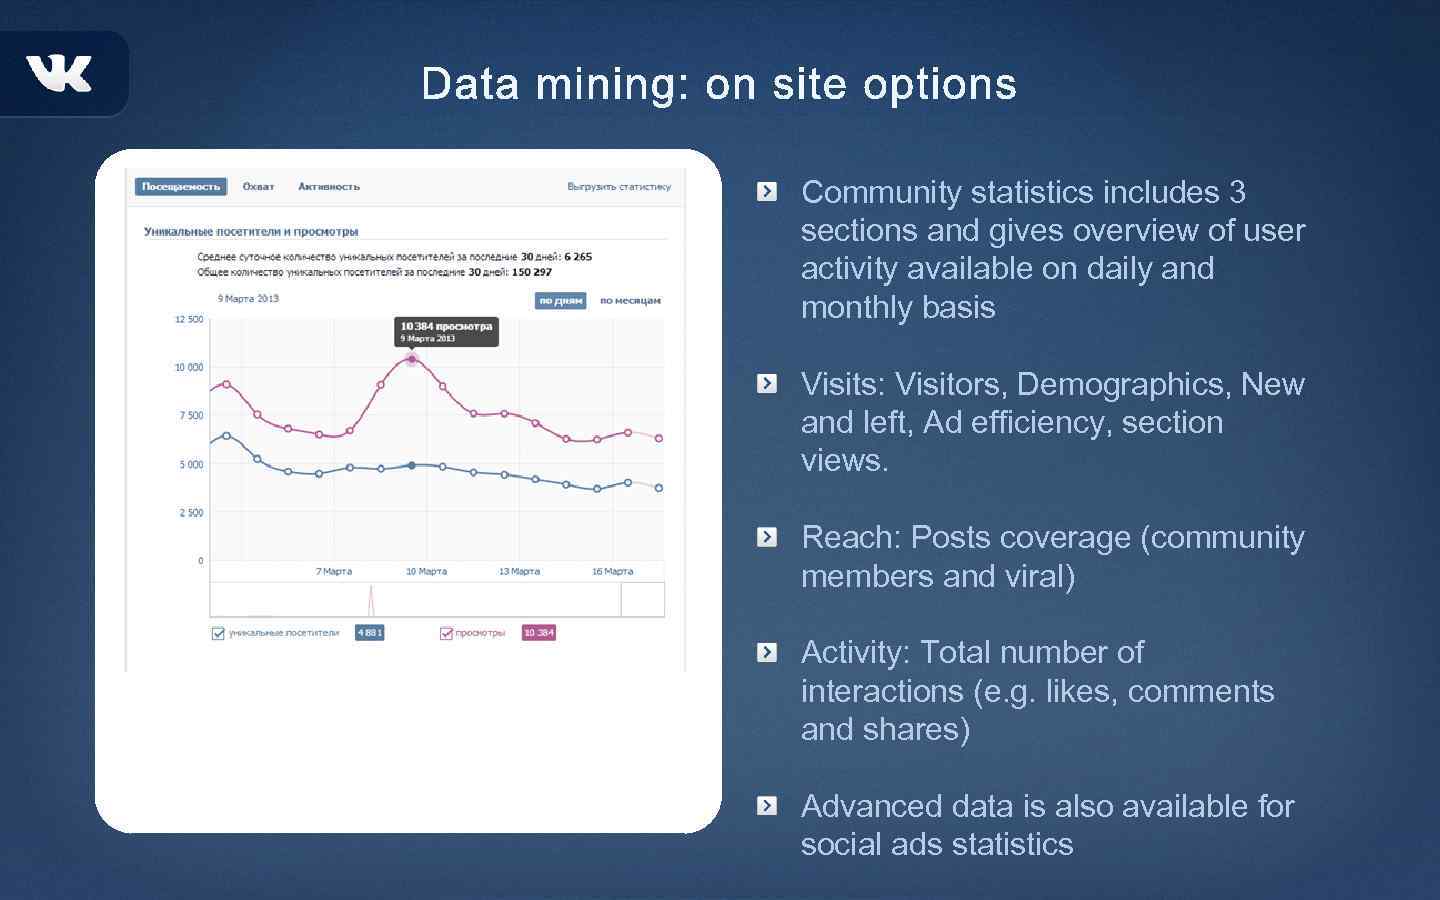 Community statistics includes 3 sections and gives overview of user activity available on daily